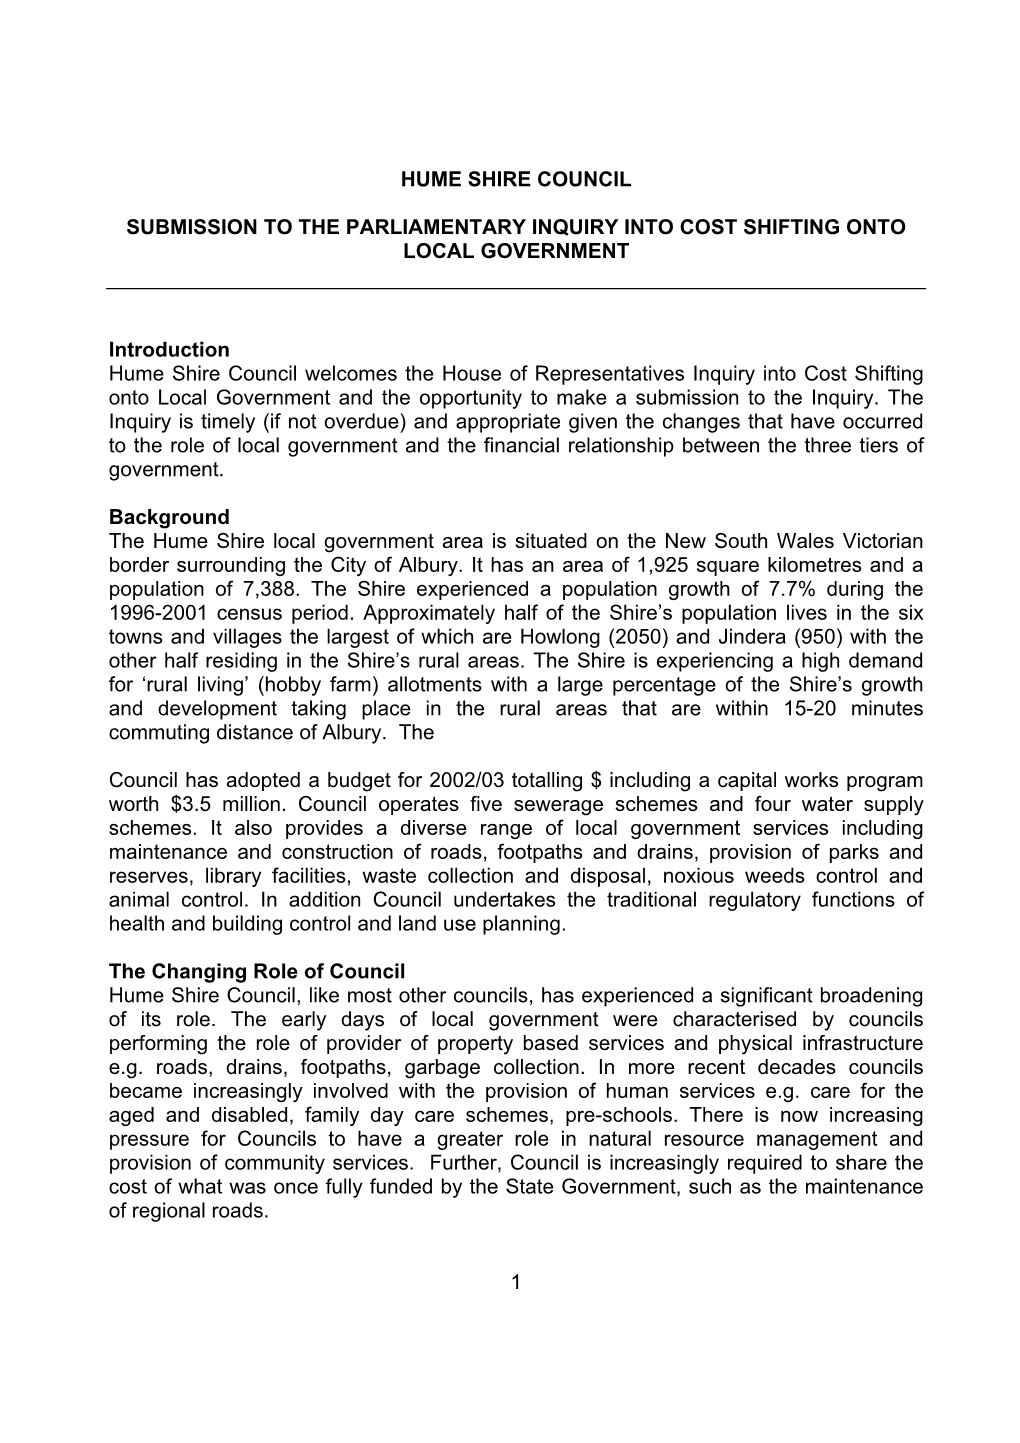 HUME SHIRE COUNCIL SUBMISSION to the PARLIAMENTARY INQUIRY INTO COST SHIFTING ONTO LOCAL GOVERNMENT 1 Introduction Hume Shire Co